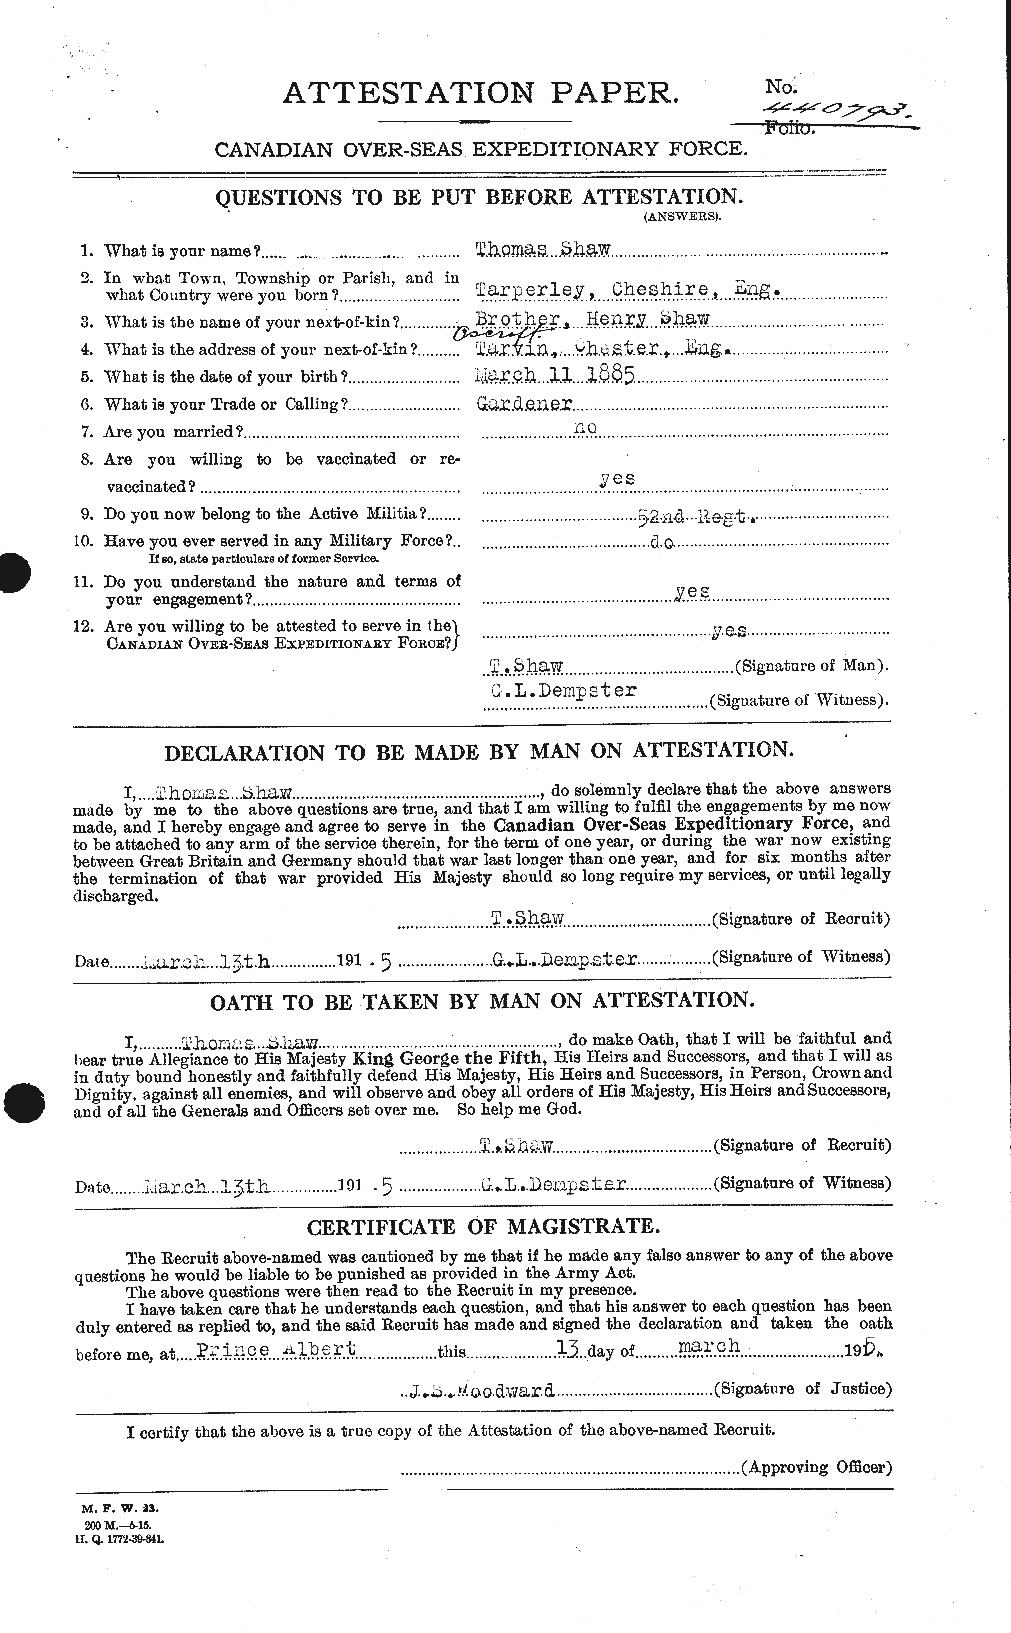 Personnel Records of the First World War - CEF 089628a